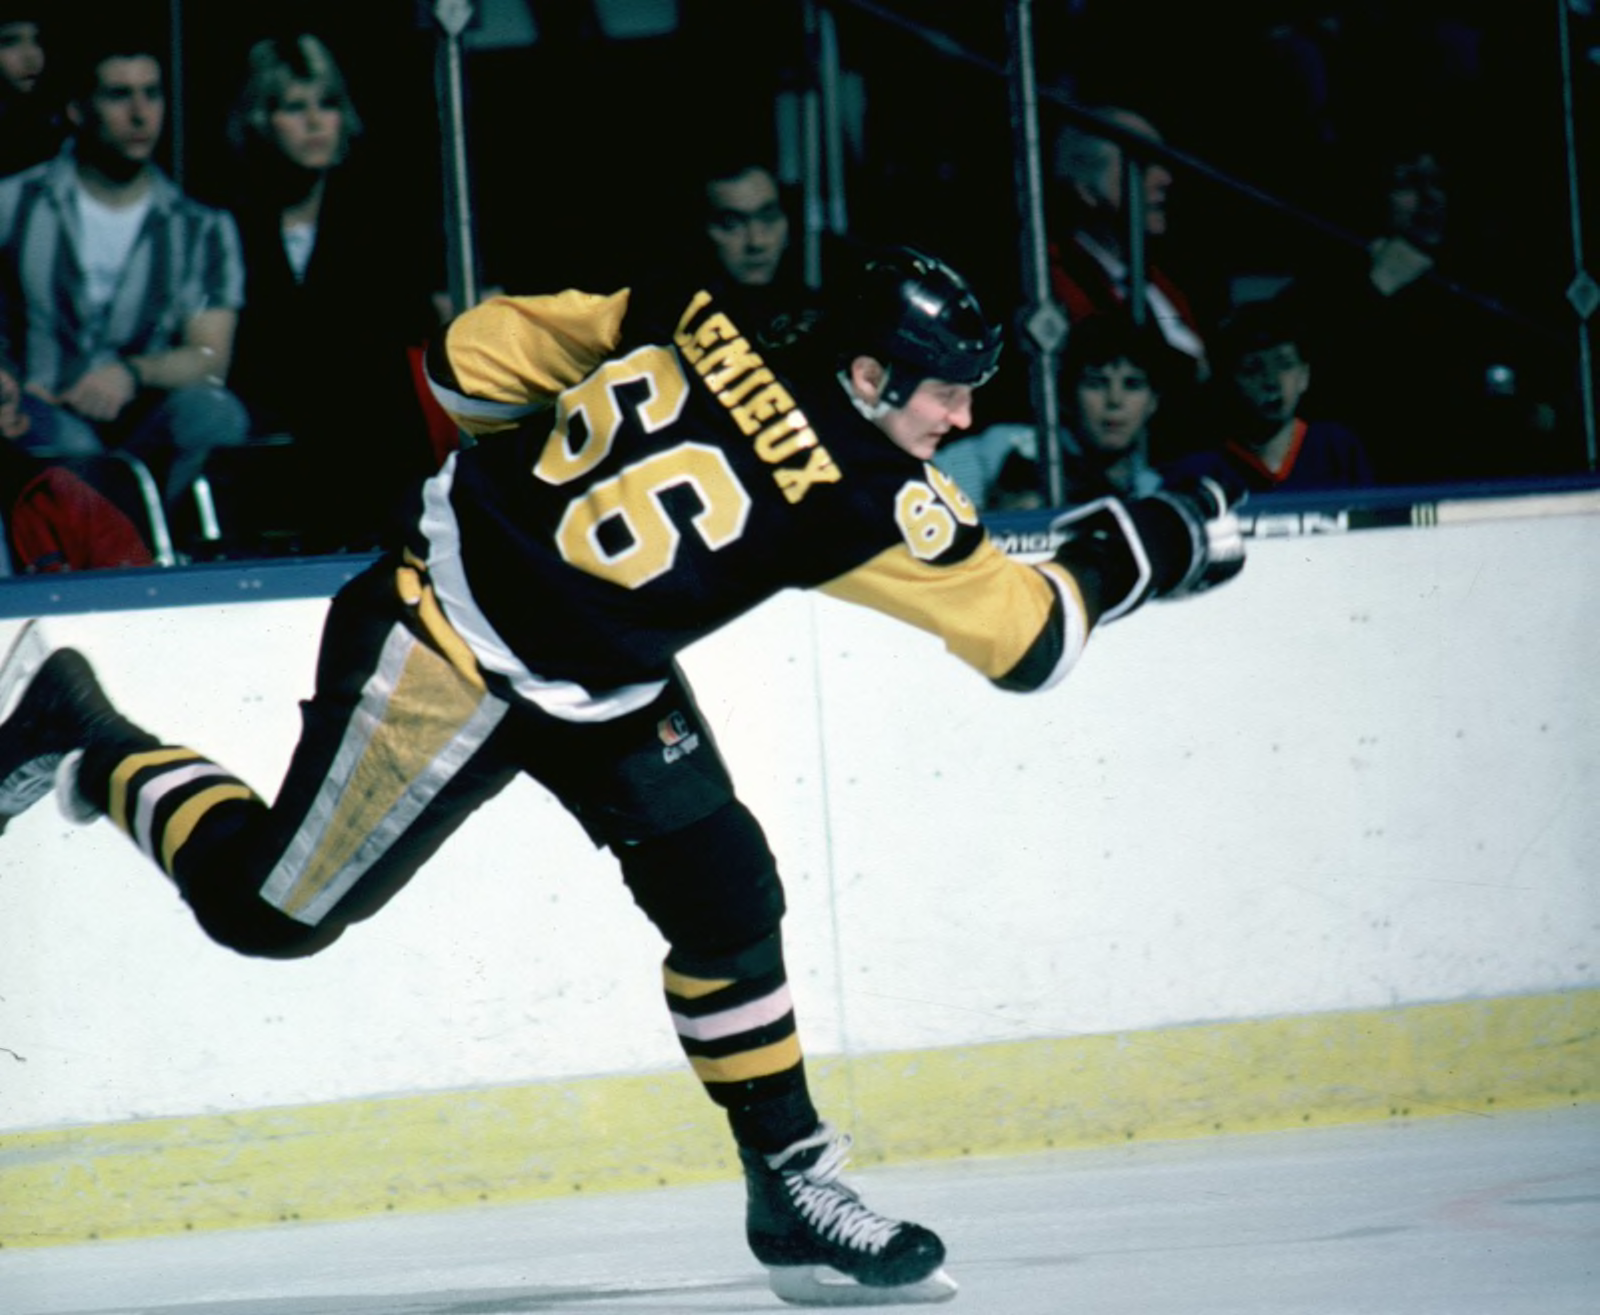 A comprehensive list of the greatest hockey players to wear 69